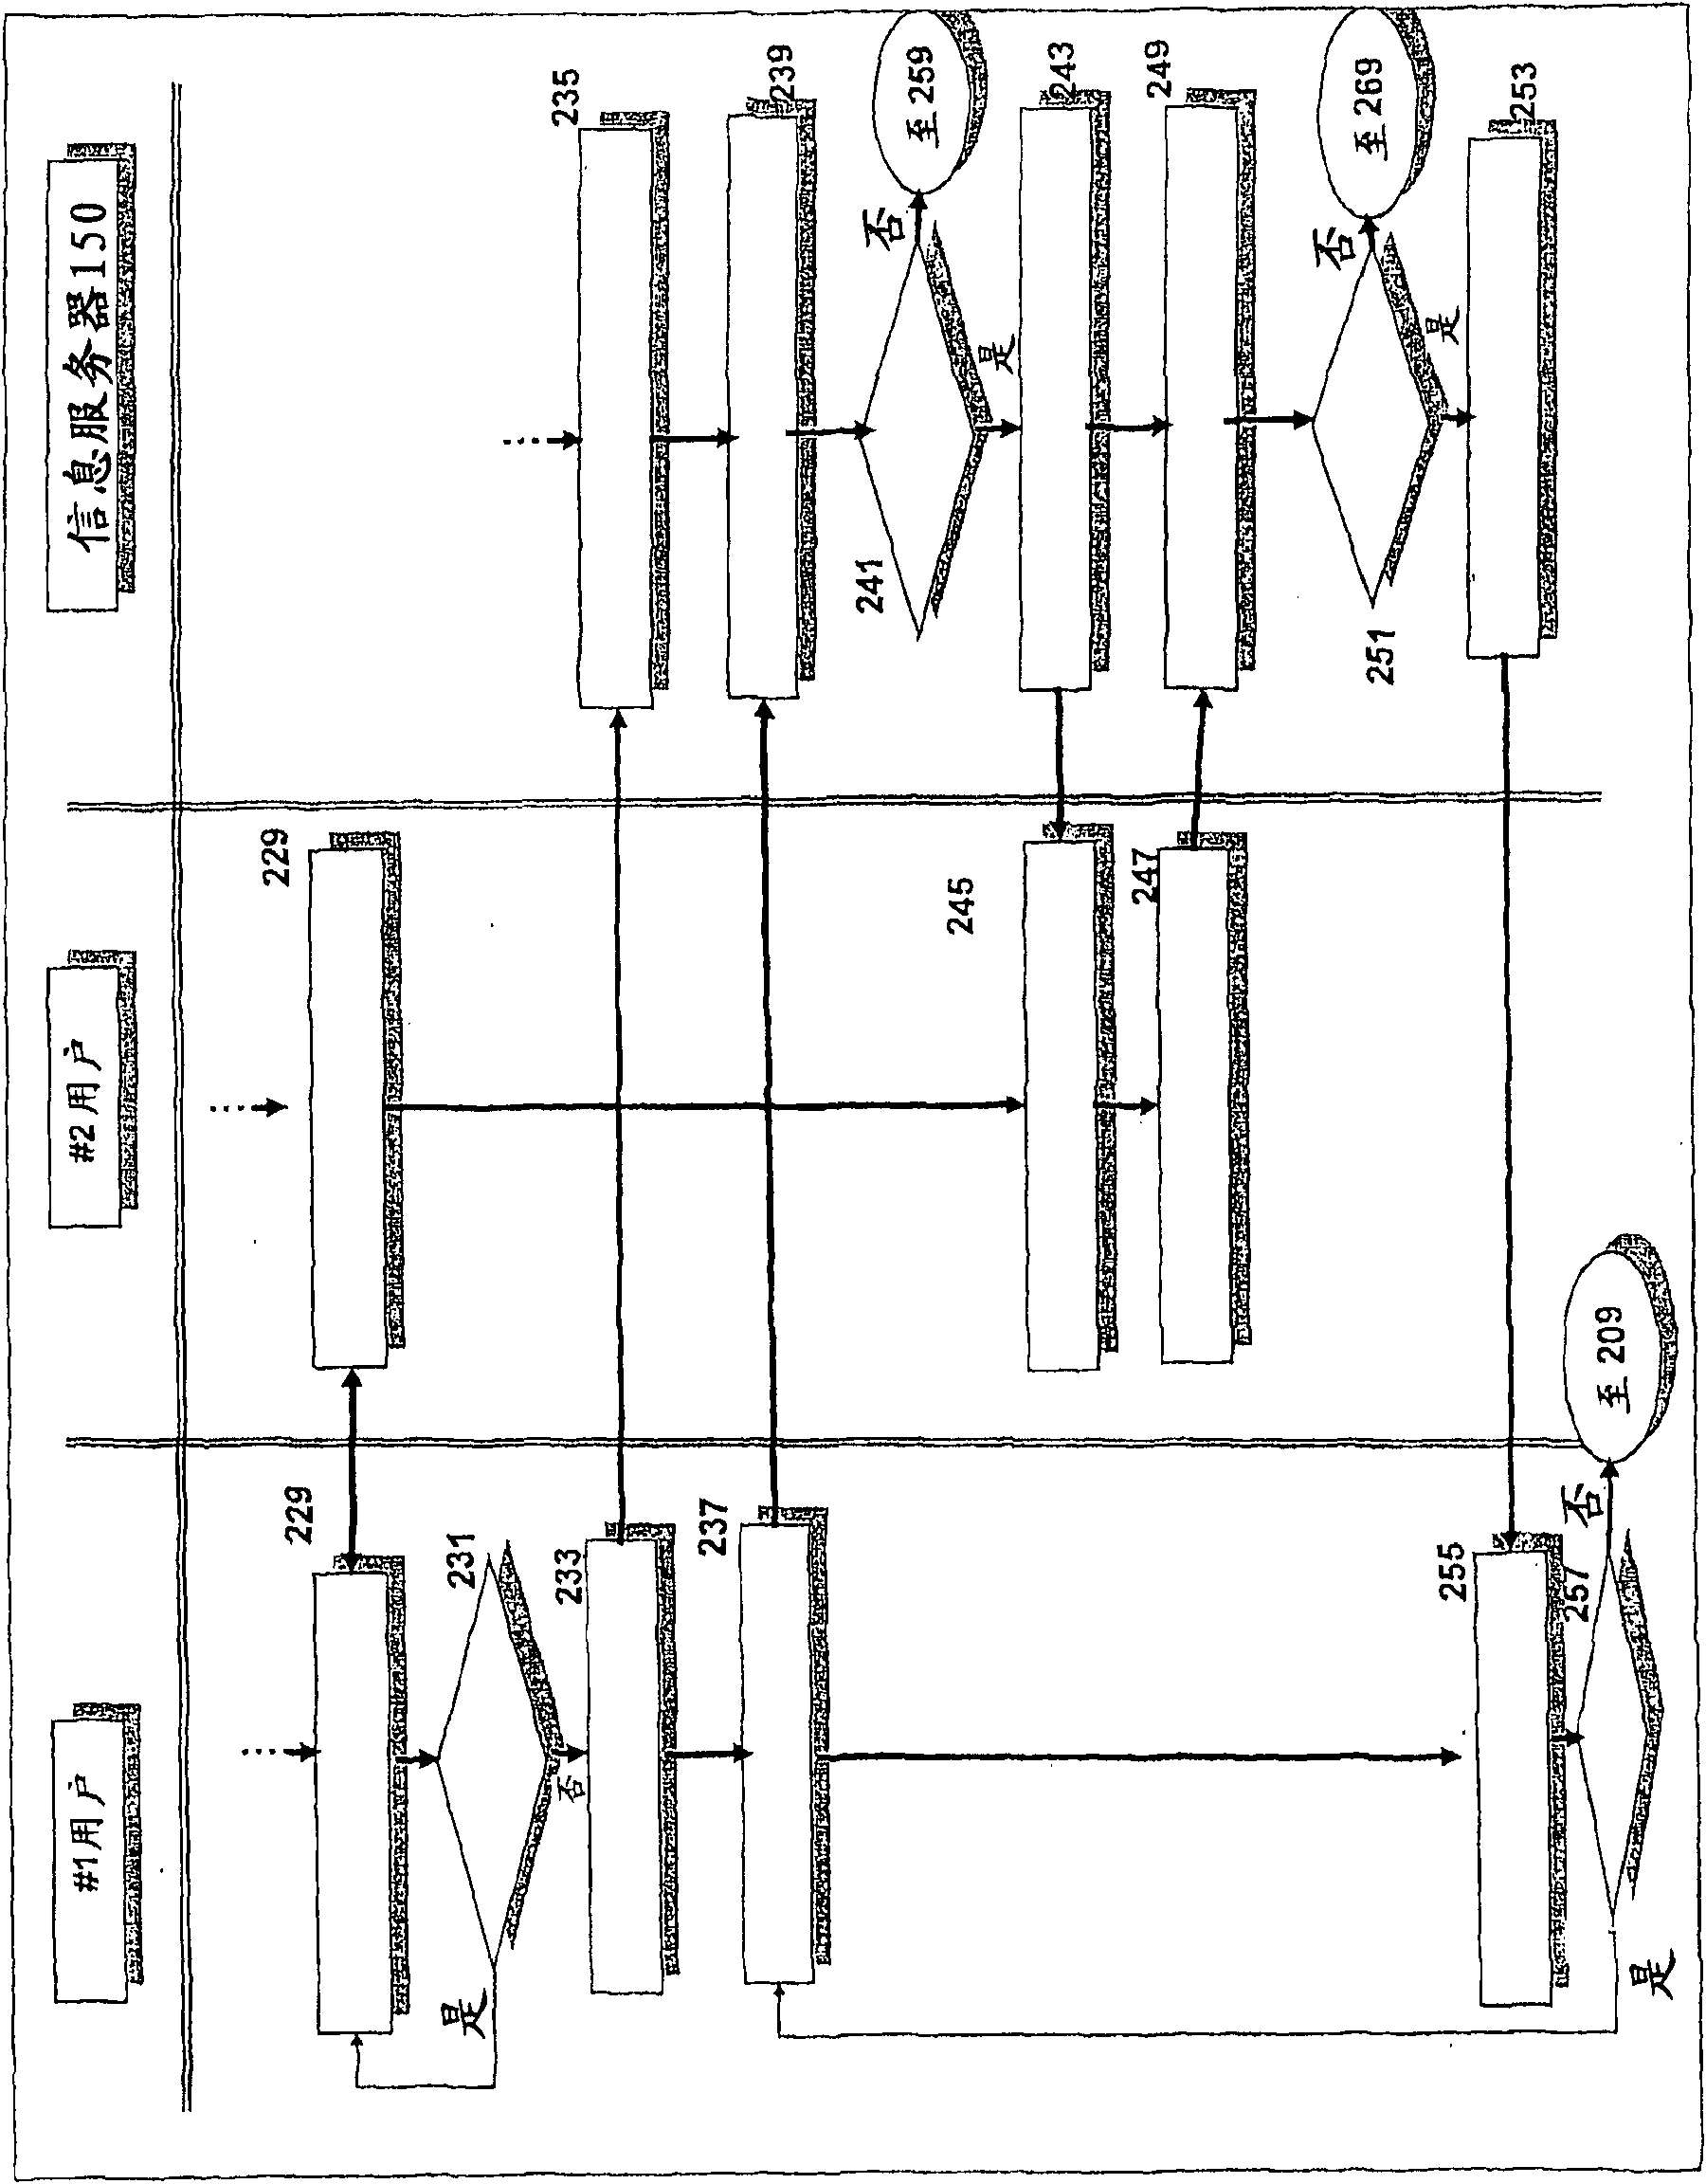 Method for managing anonymous communication between users according to short-distance wireless connection identifier